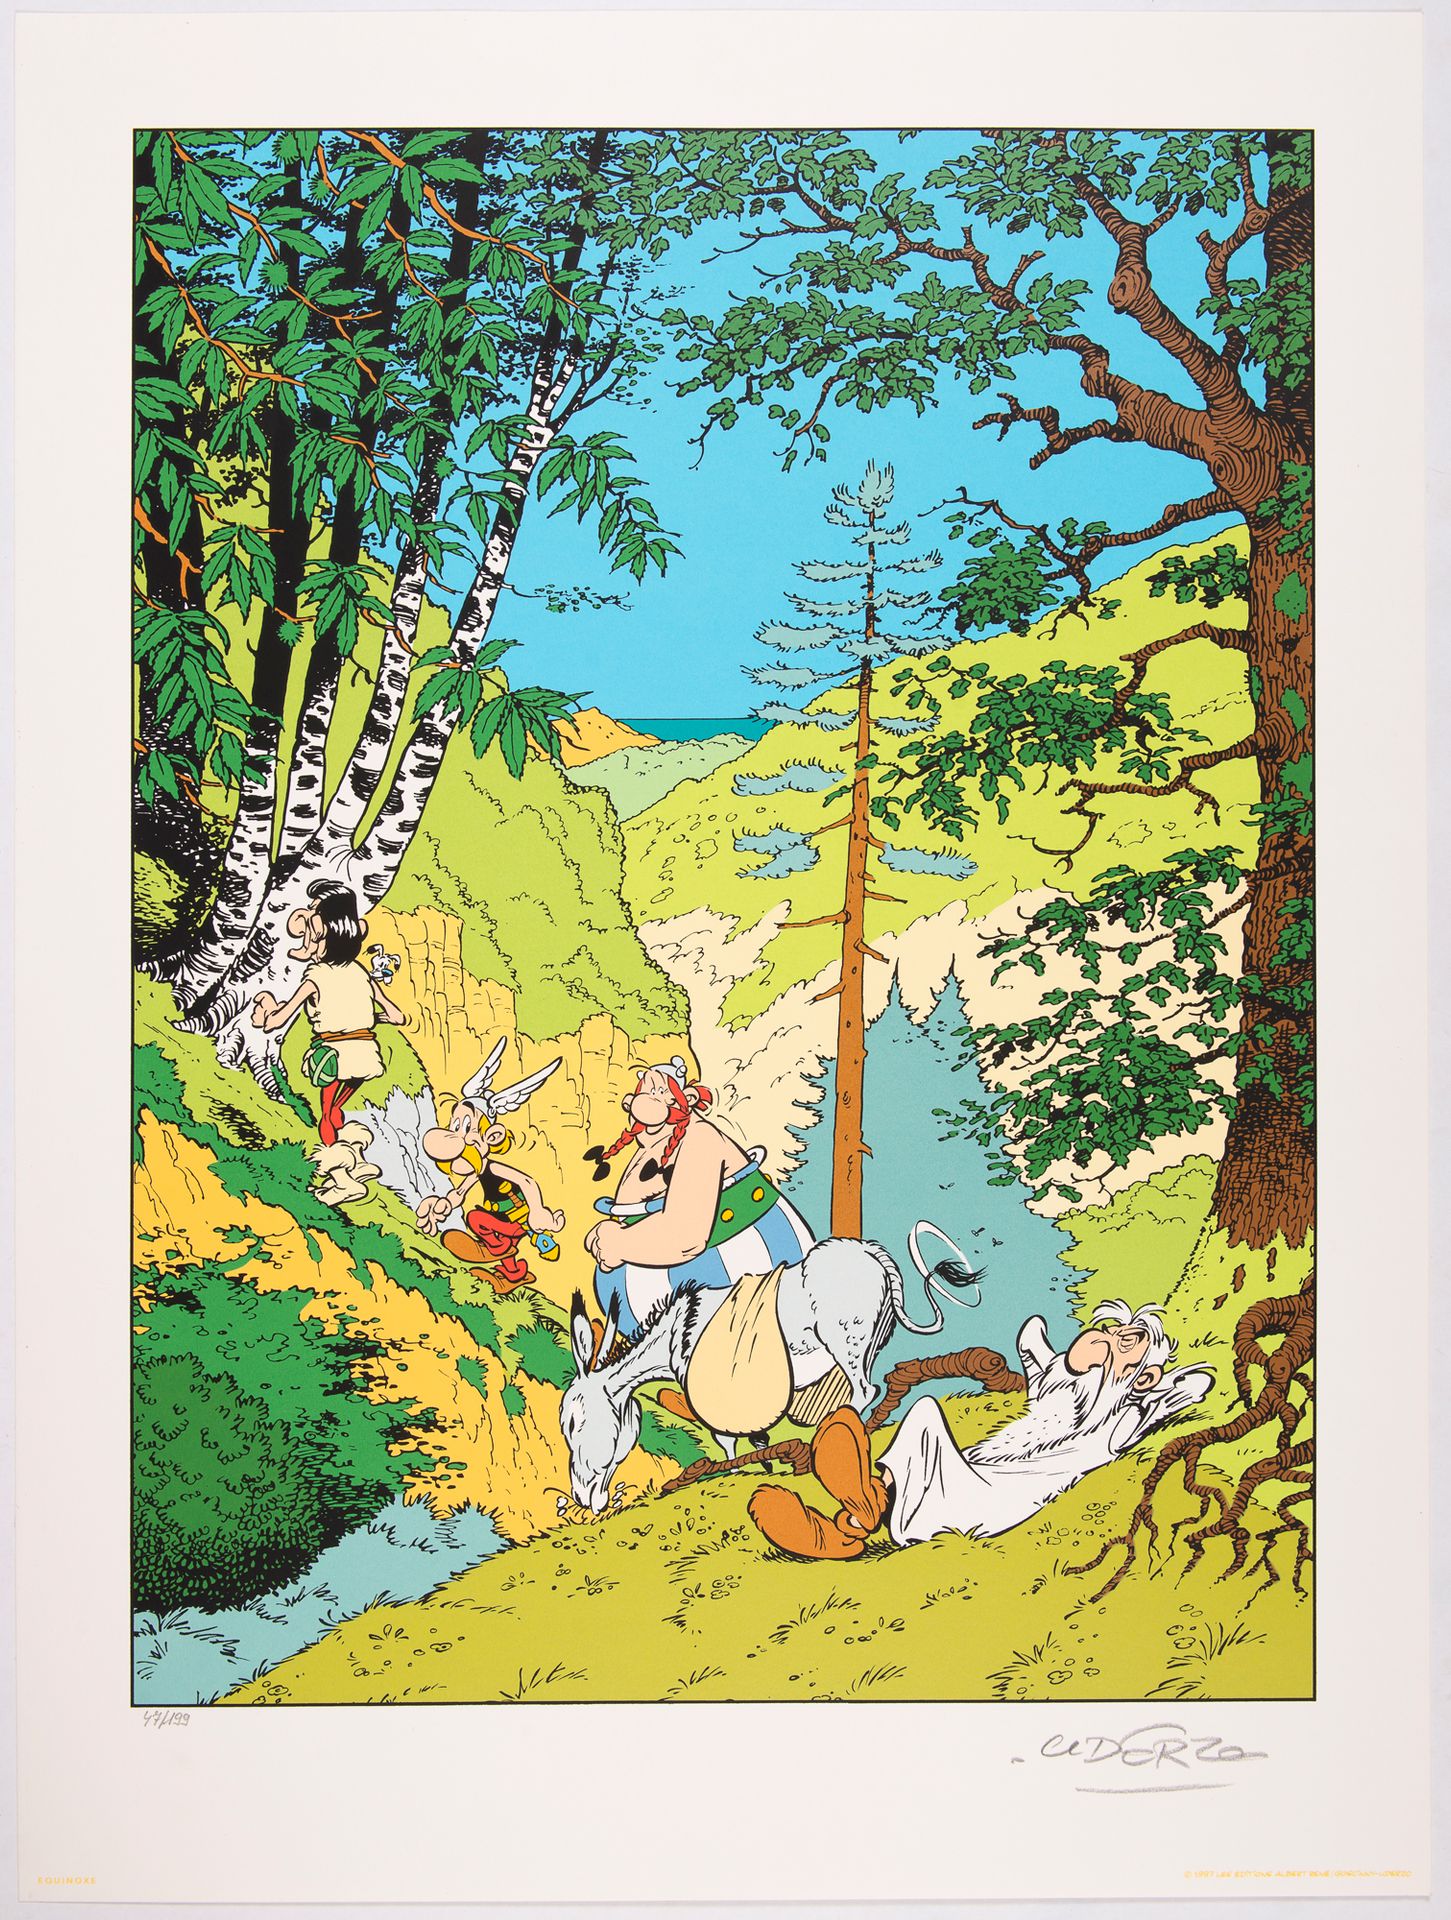 UDERZO Serigraphy : Magnificent large serigraphy (60 x 80 cm) from Asterix in Co&hellip;